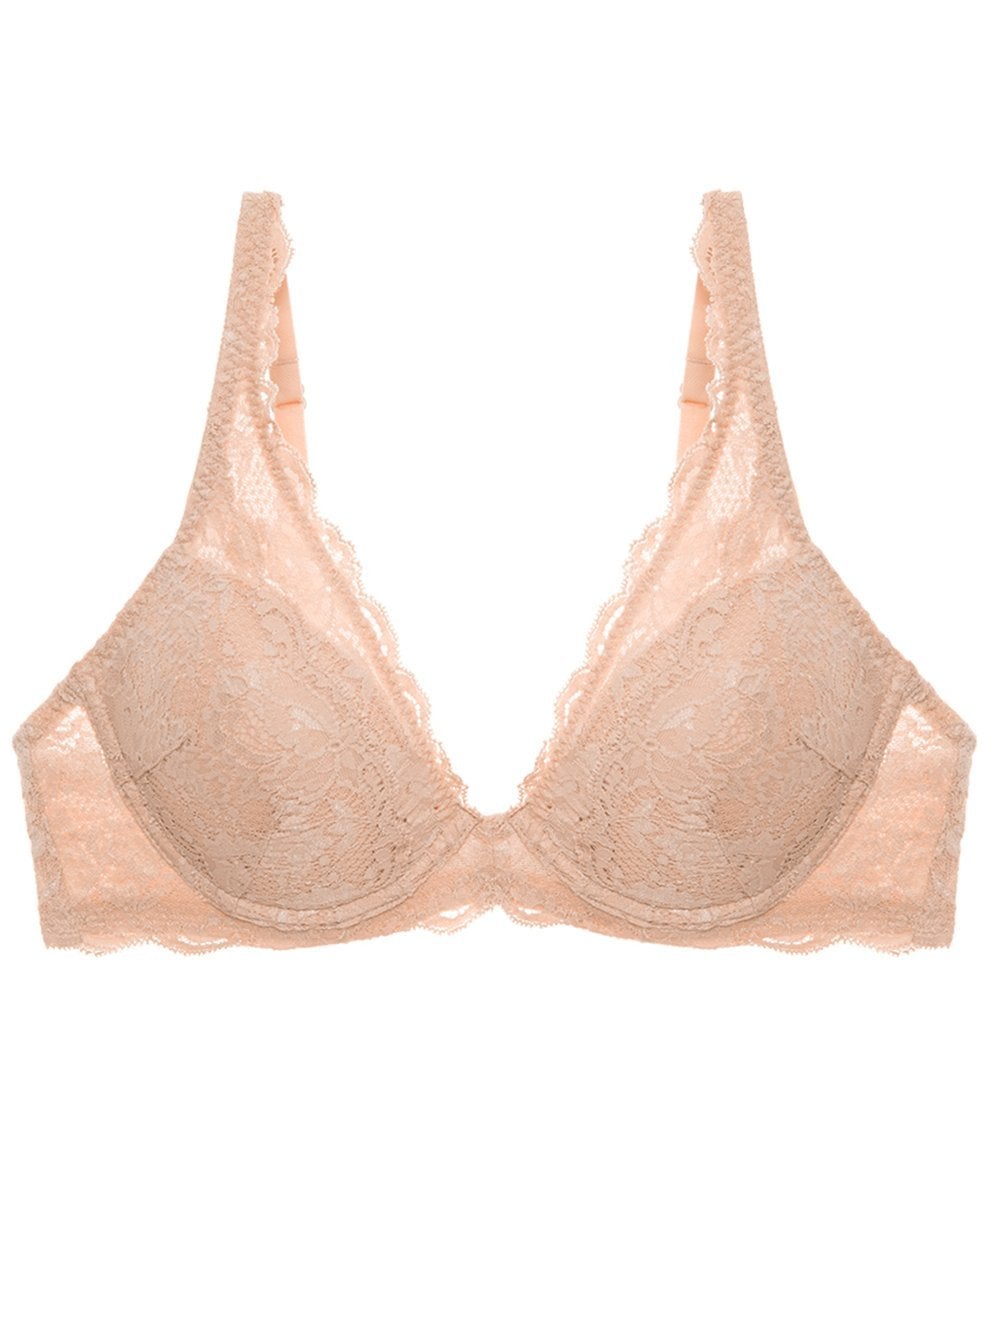 Cosabella | Never Say Never Candie Padded Bra | Sale